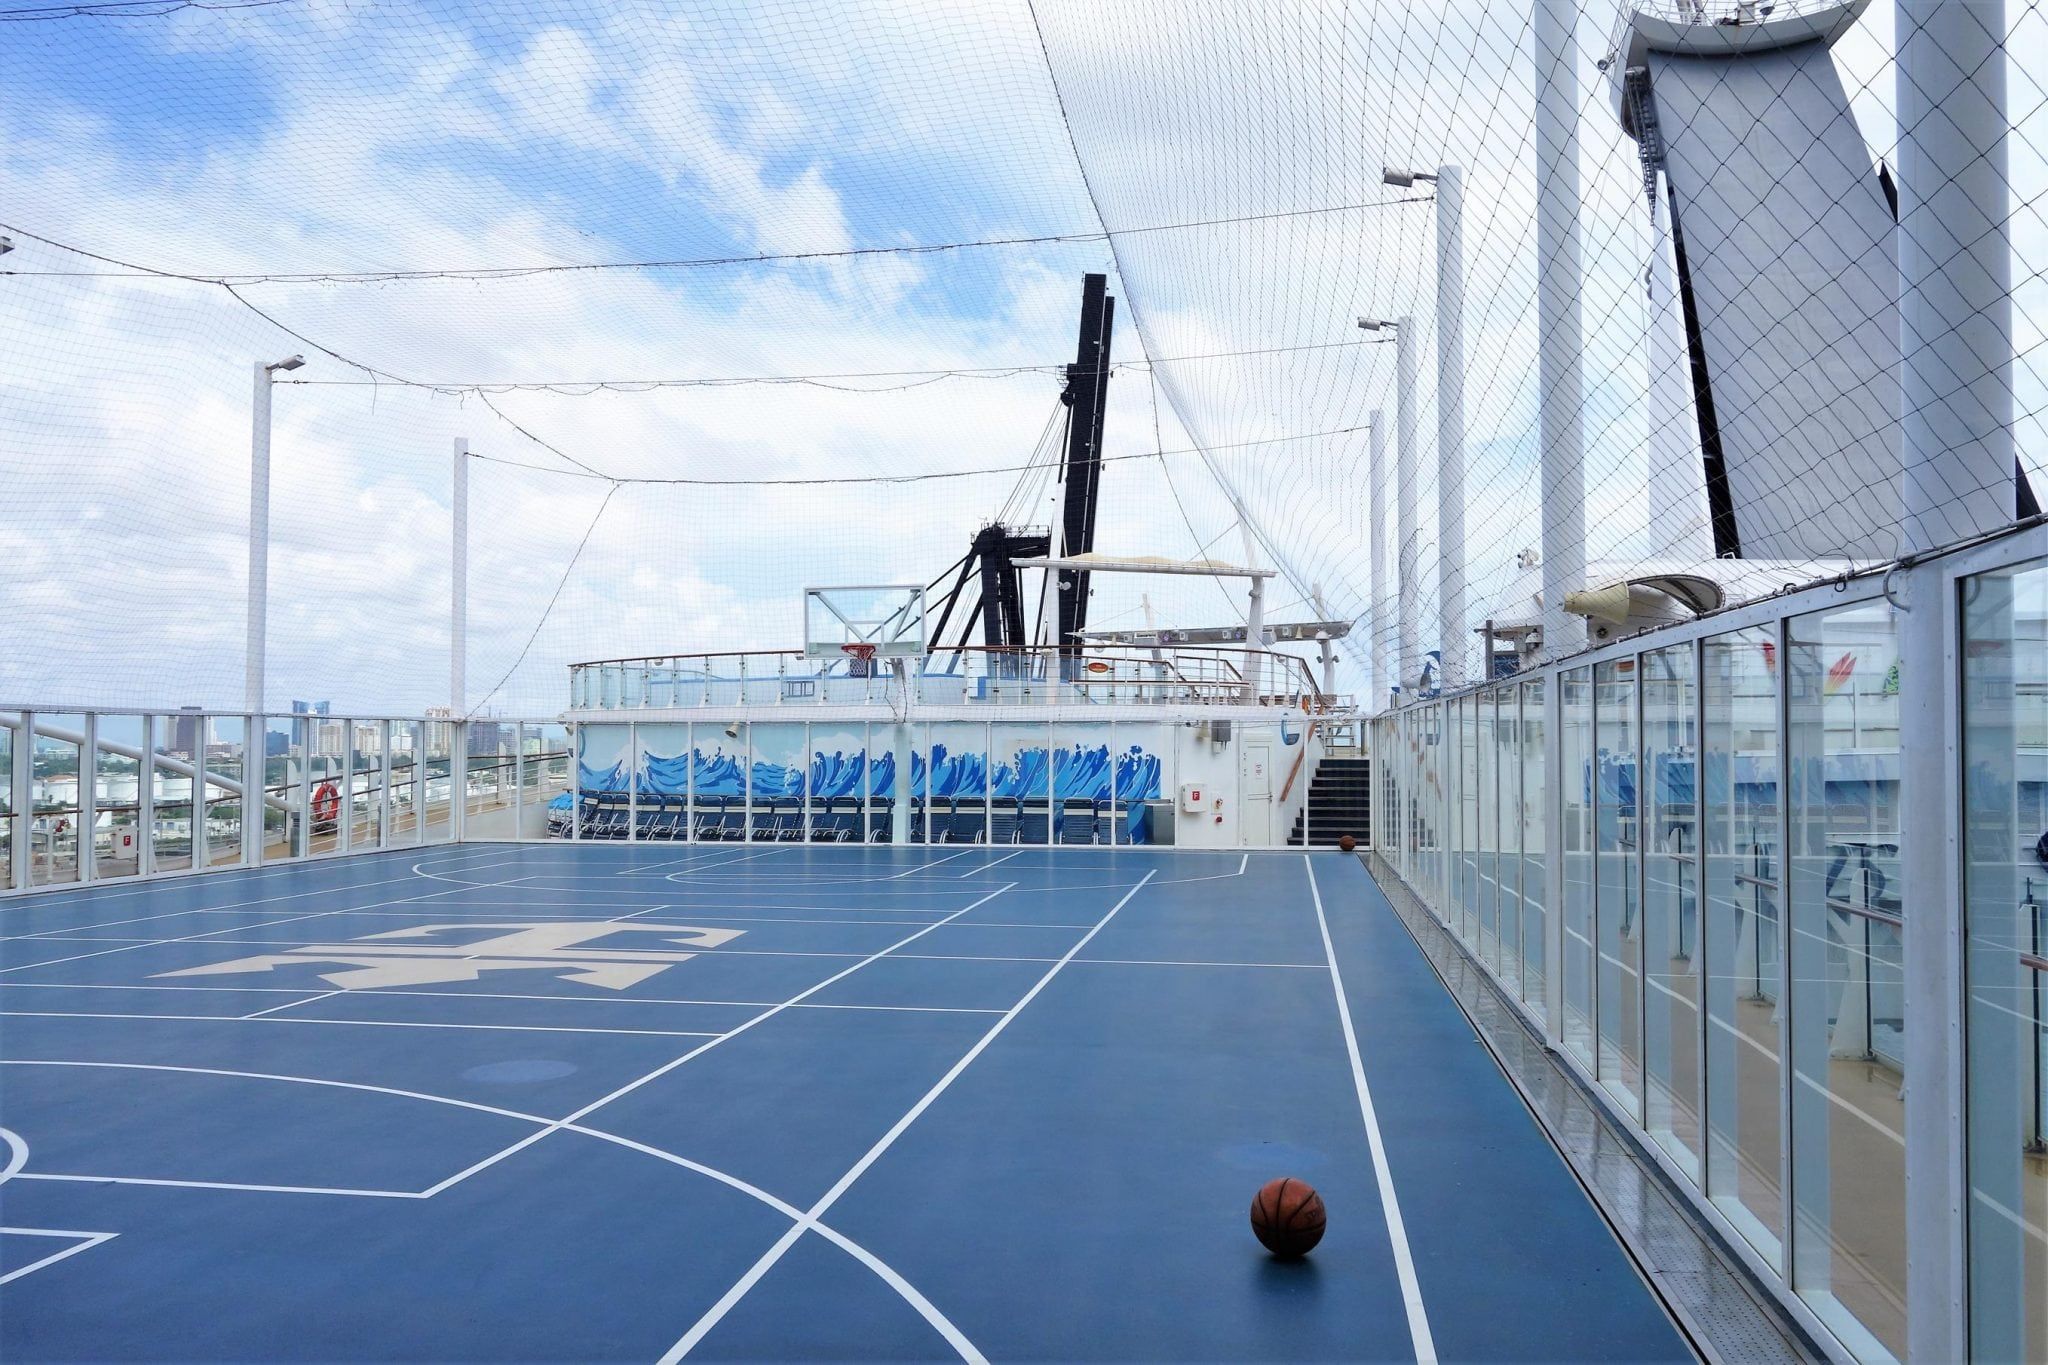 Stay Active on Oasis of the Seas